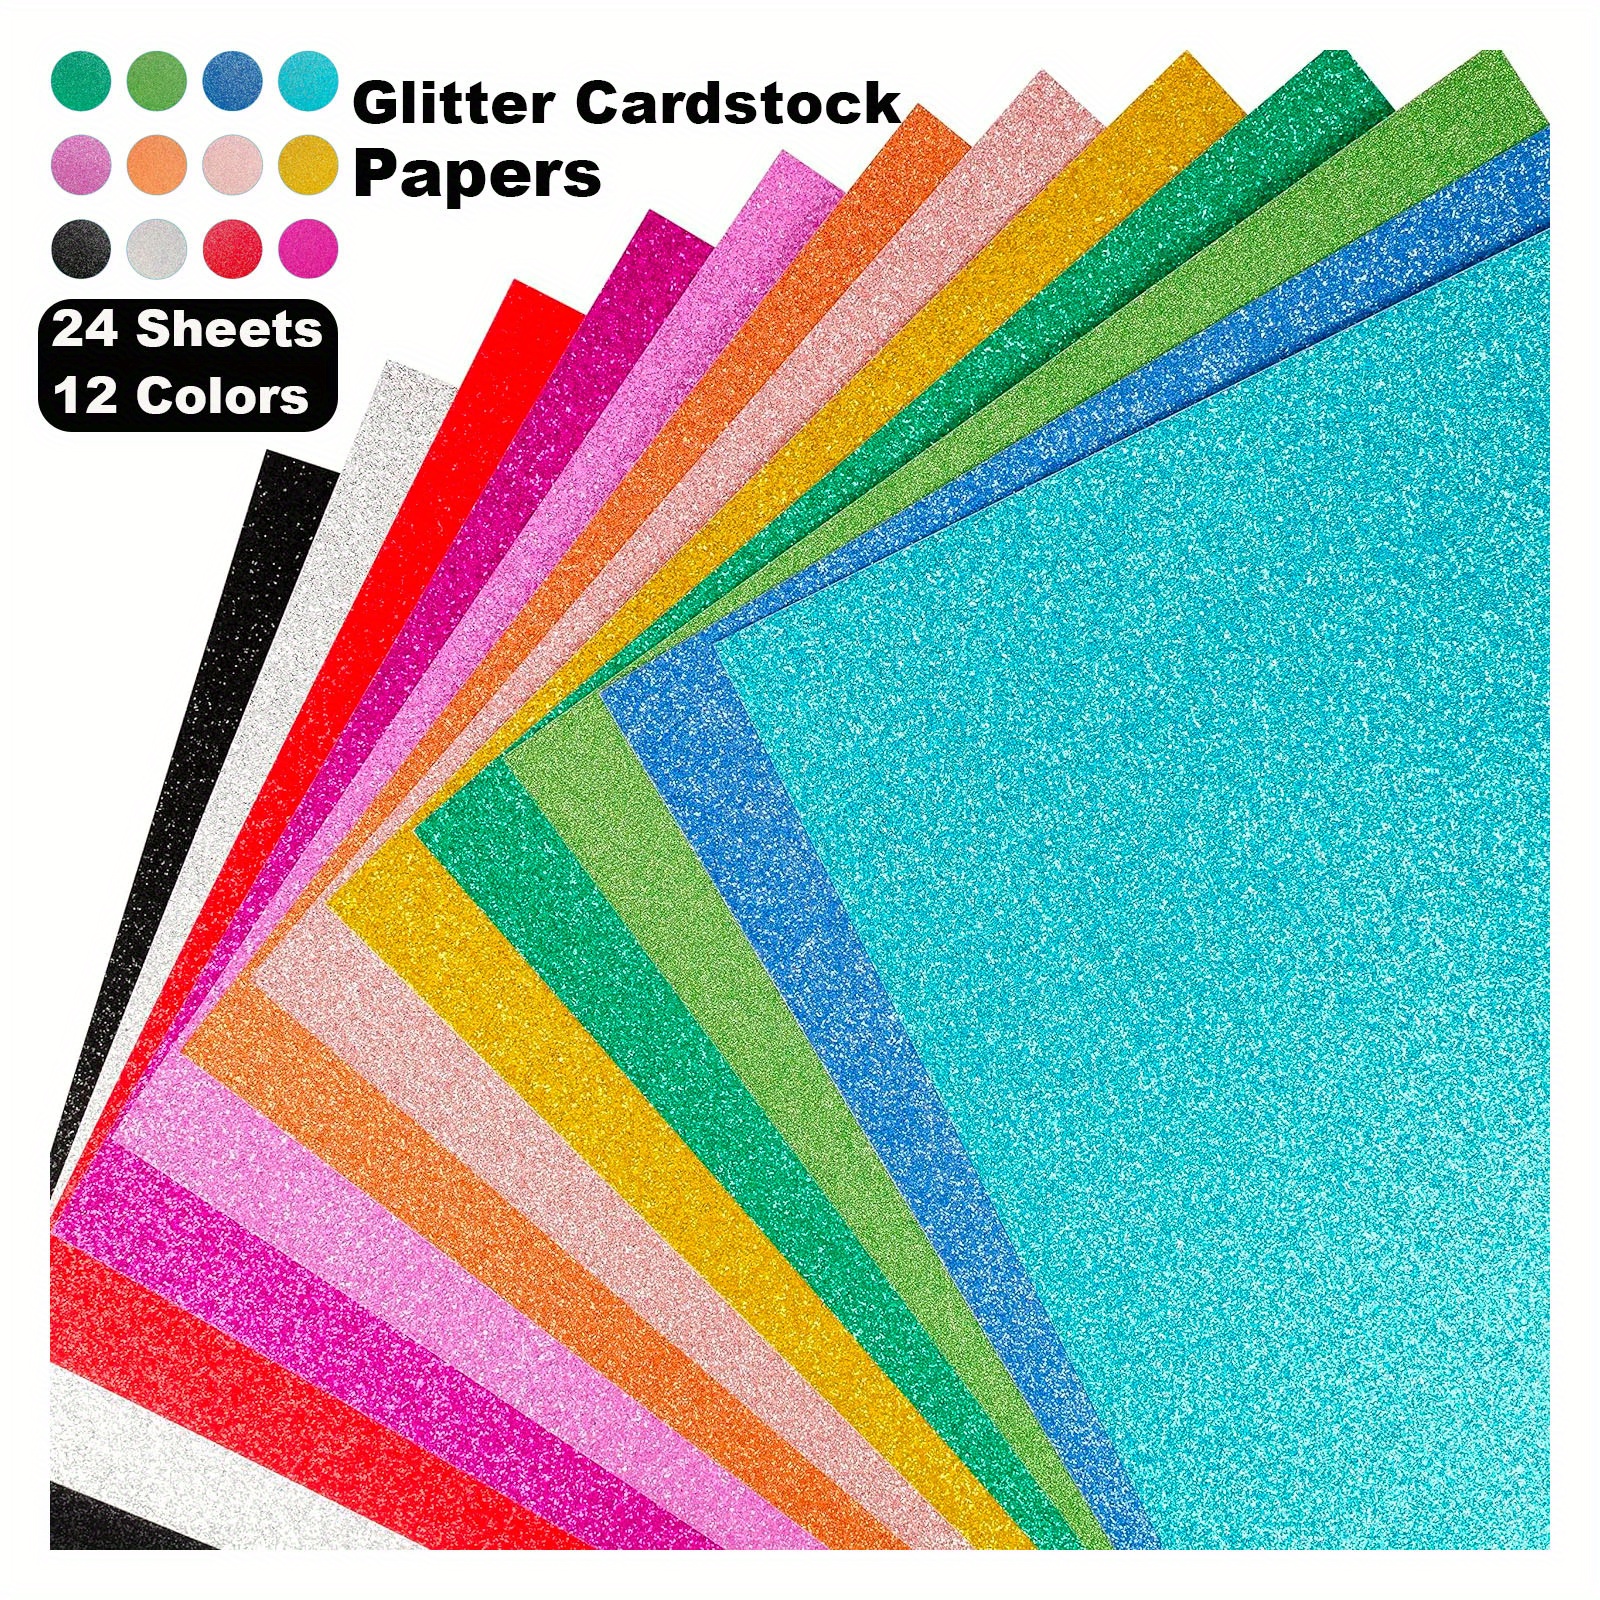 6 Pack: Glitter Metallic Cardstock Paper Pad by Recollections™, 12